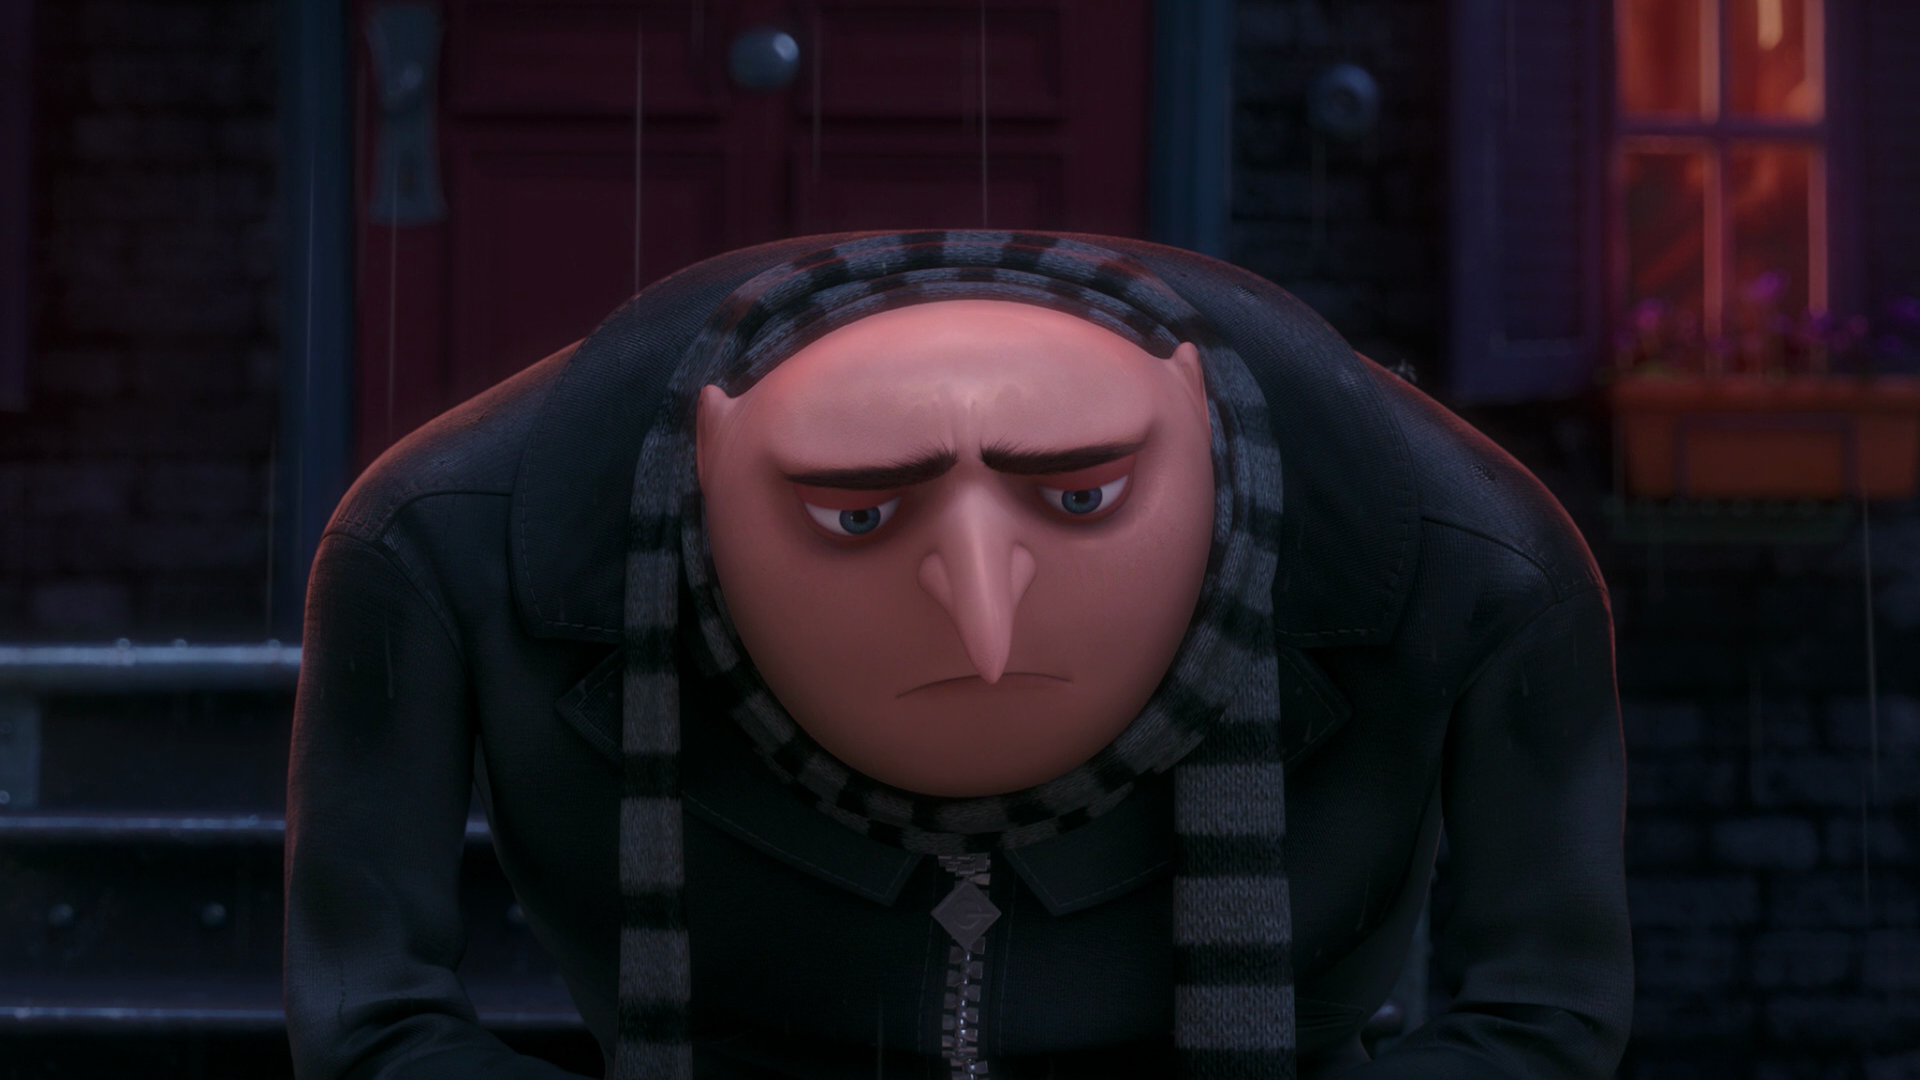 Despicable Me 2 HD Wallpaper Background Image 1920x1080 ID 507933 